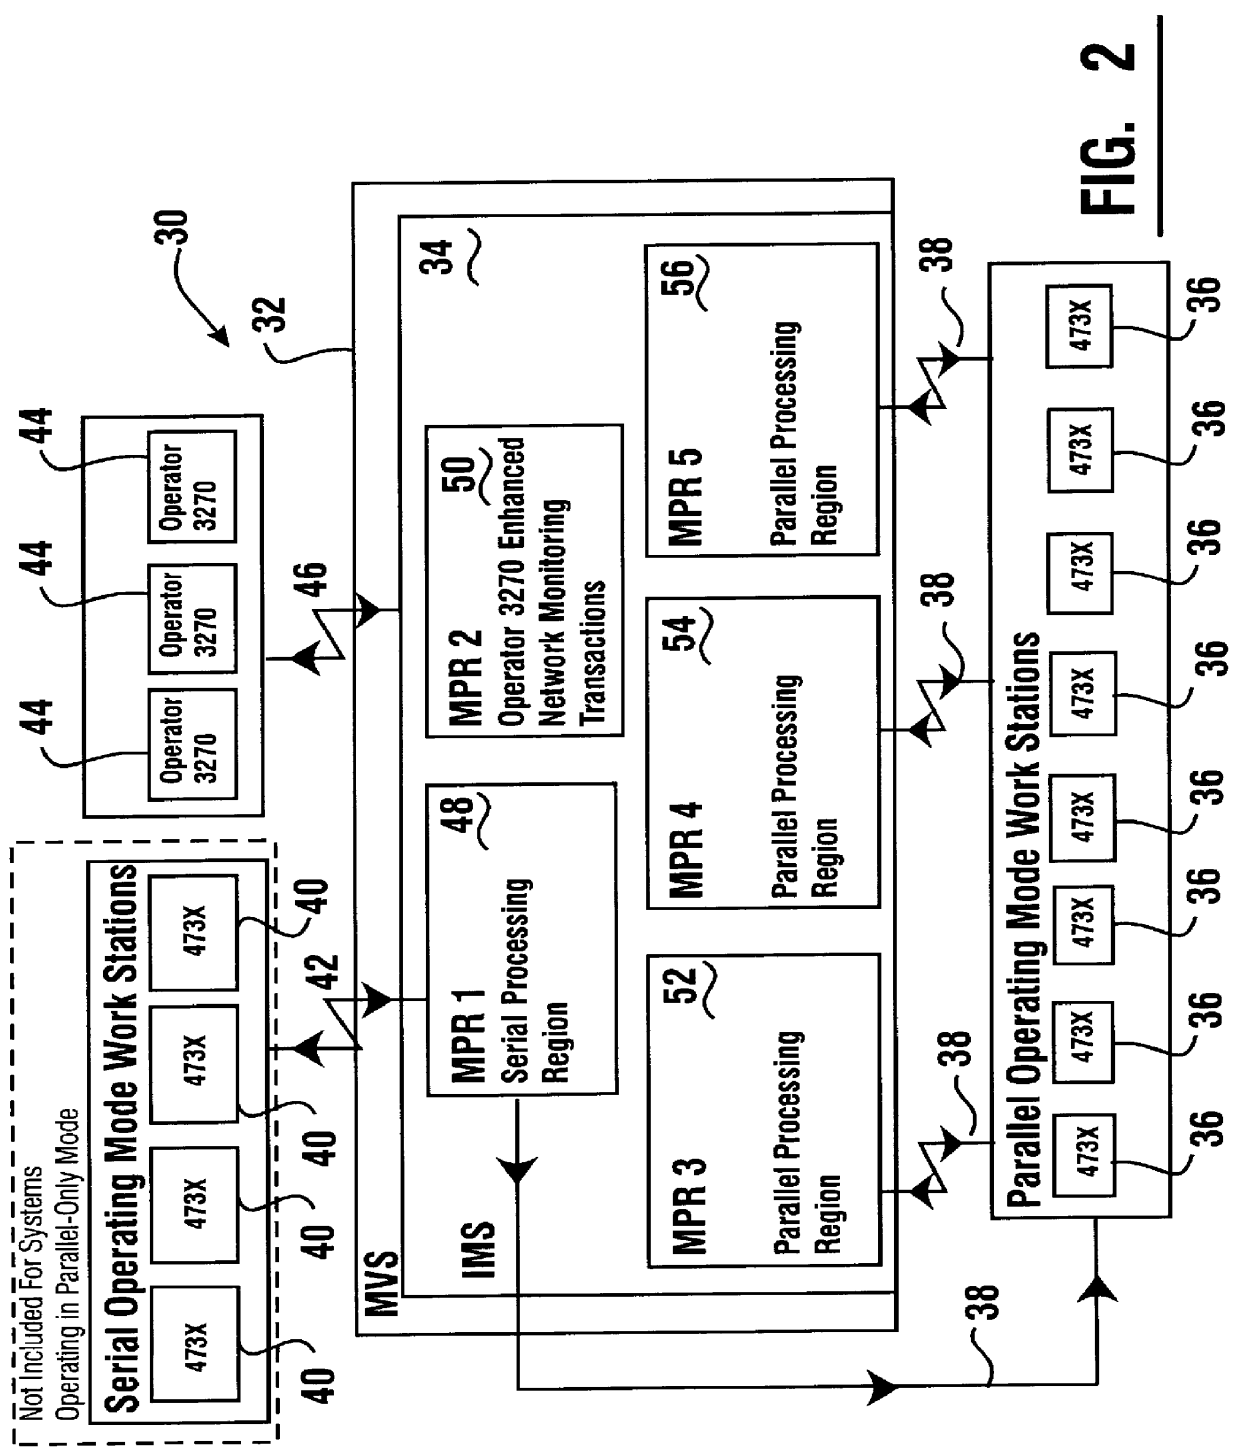 Enhanced network monitor system for automated banking machines